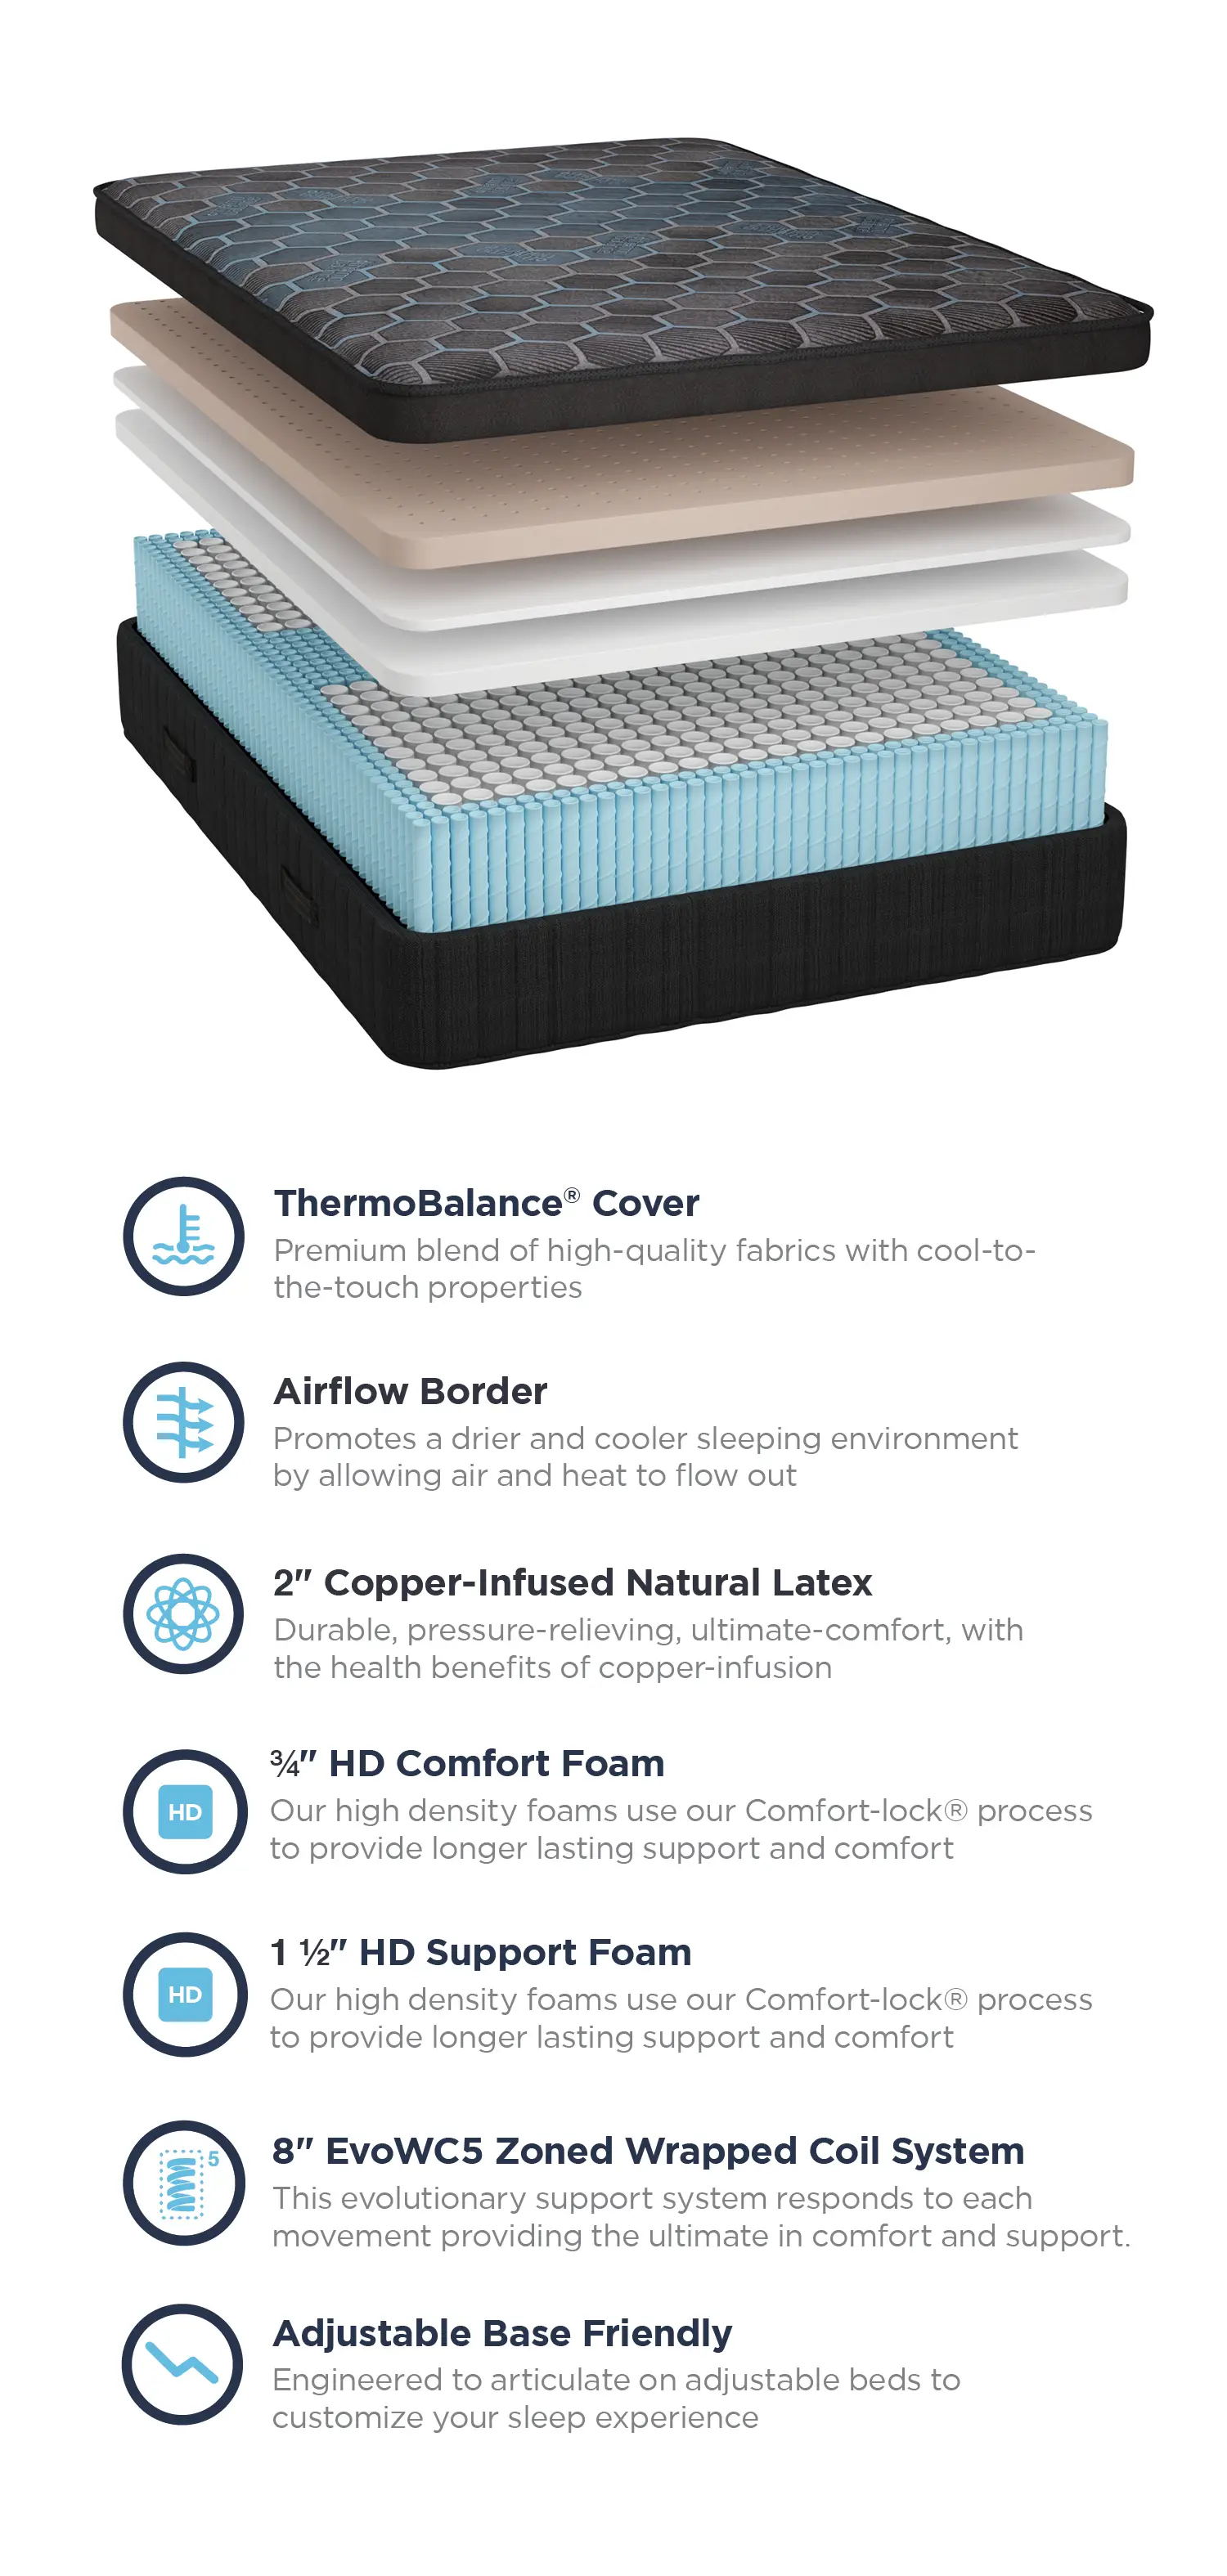 https://www.thermobalancesleep.com/assets/tb1300-firm-mobile.webp